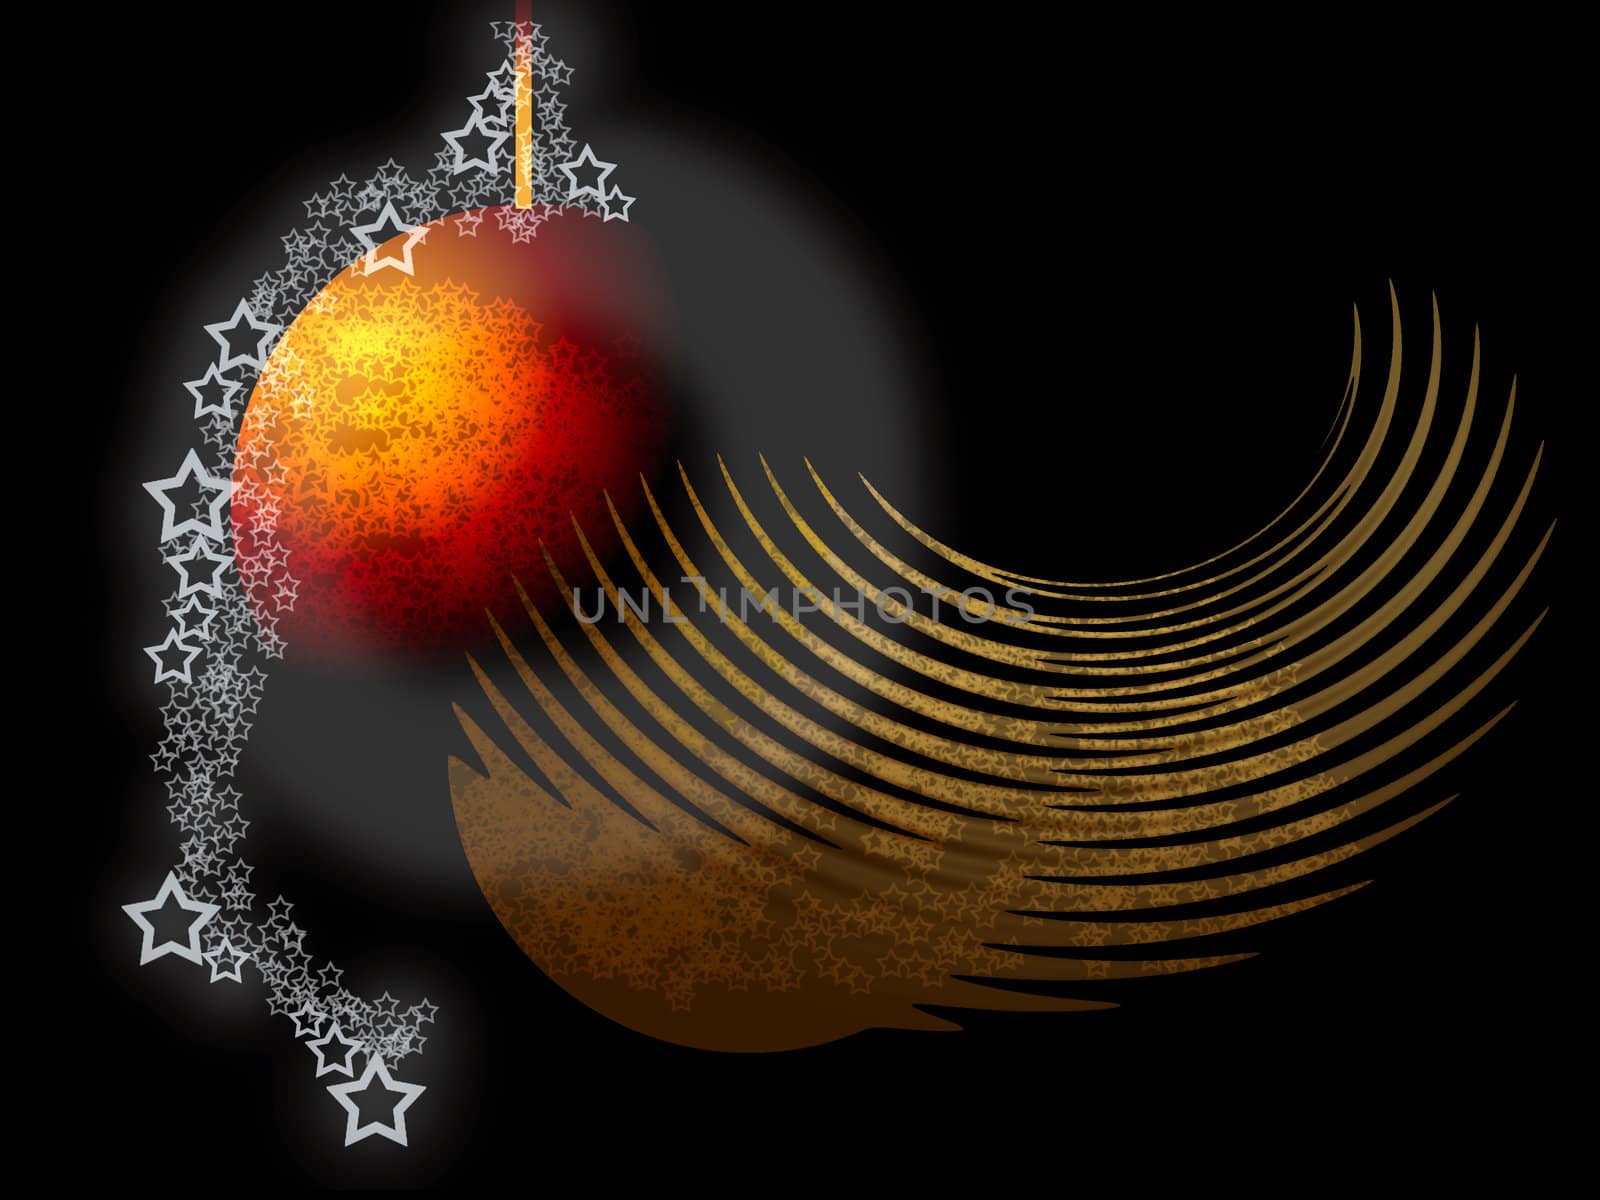 Abstract Theme with Hot Ball, Lacy Stars over Black Background